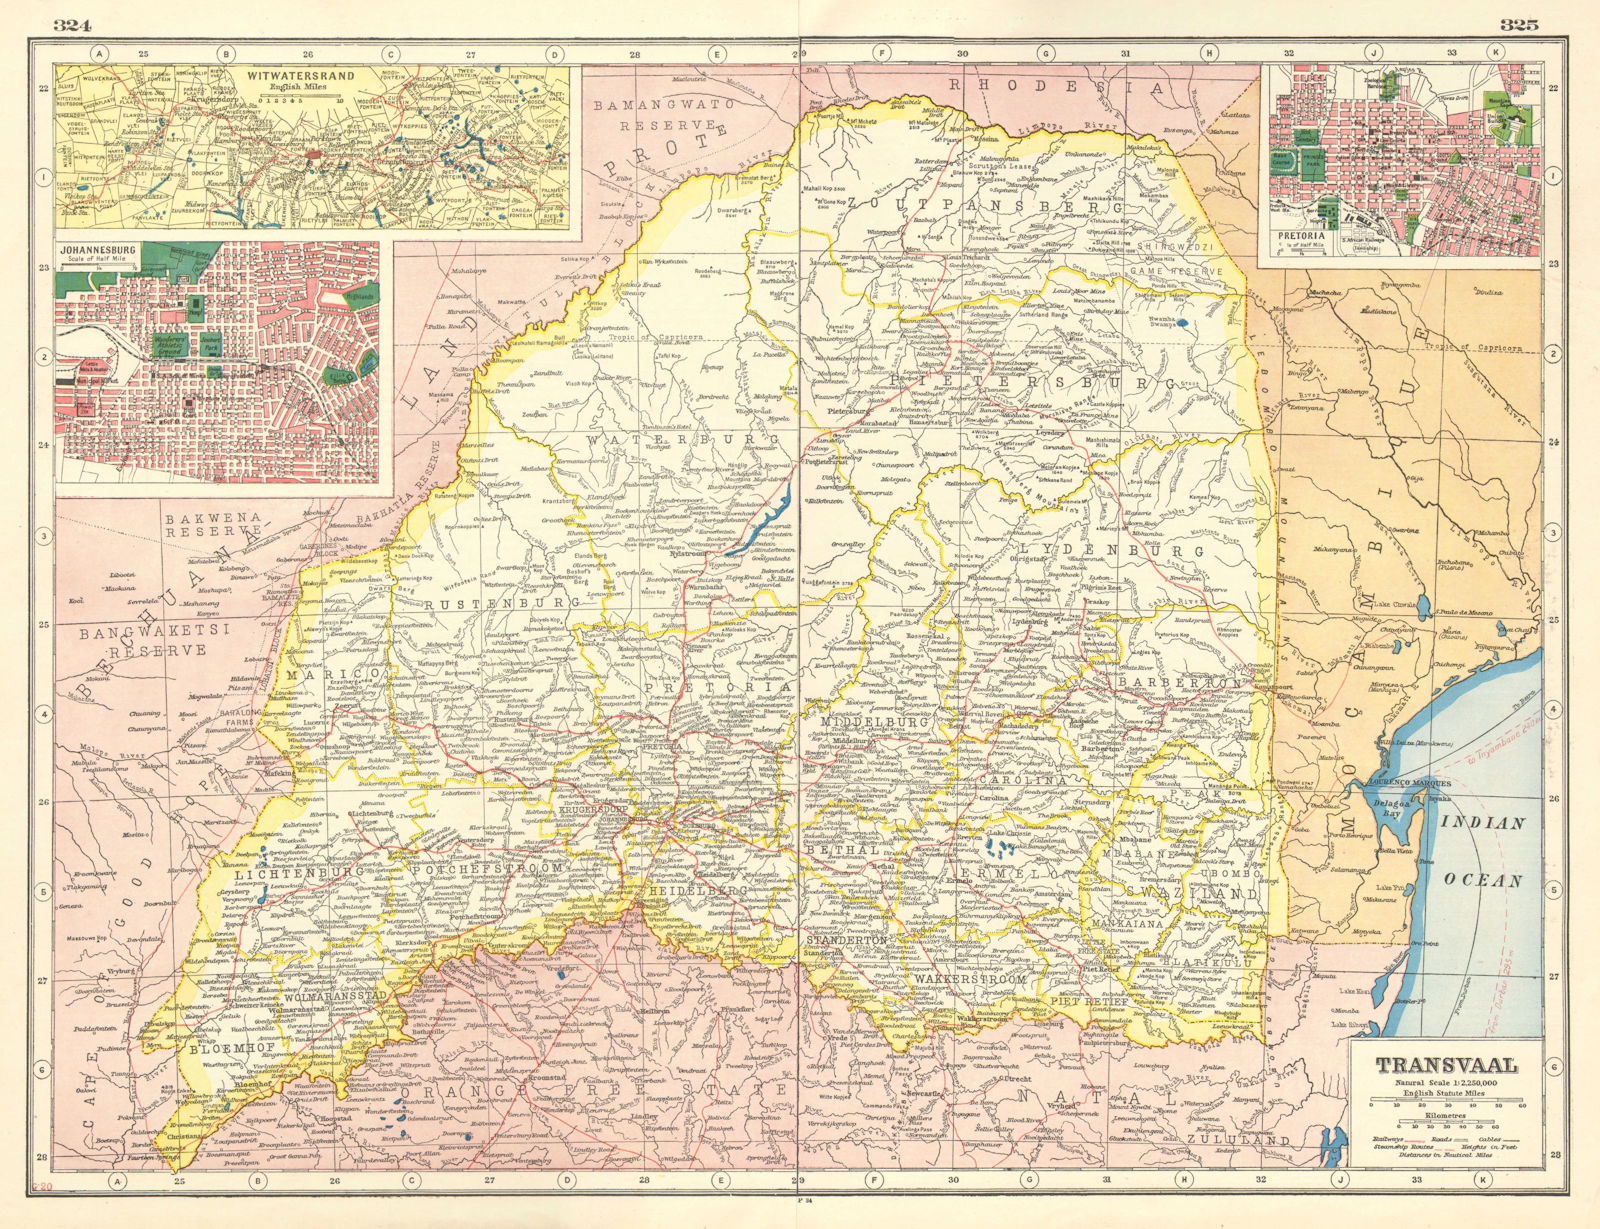 TRANSVAAL. South Africa. Inset Witwatersrand, Johannesburg & Pretoria  1920 map